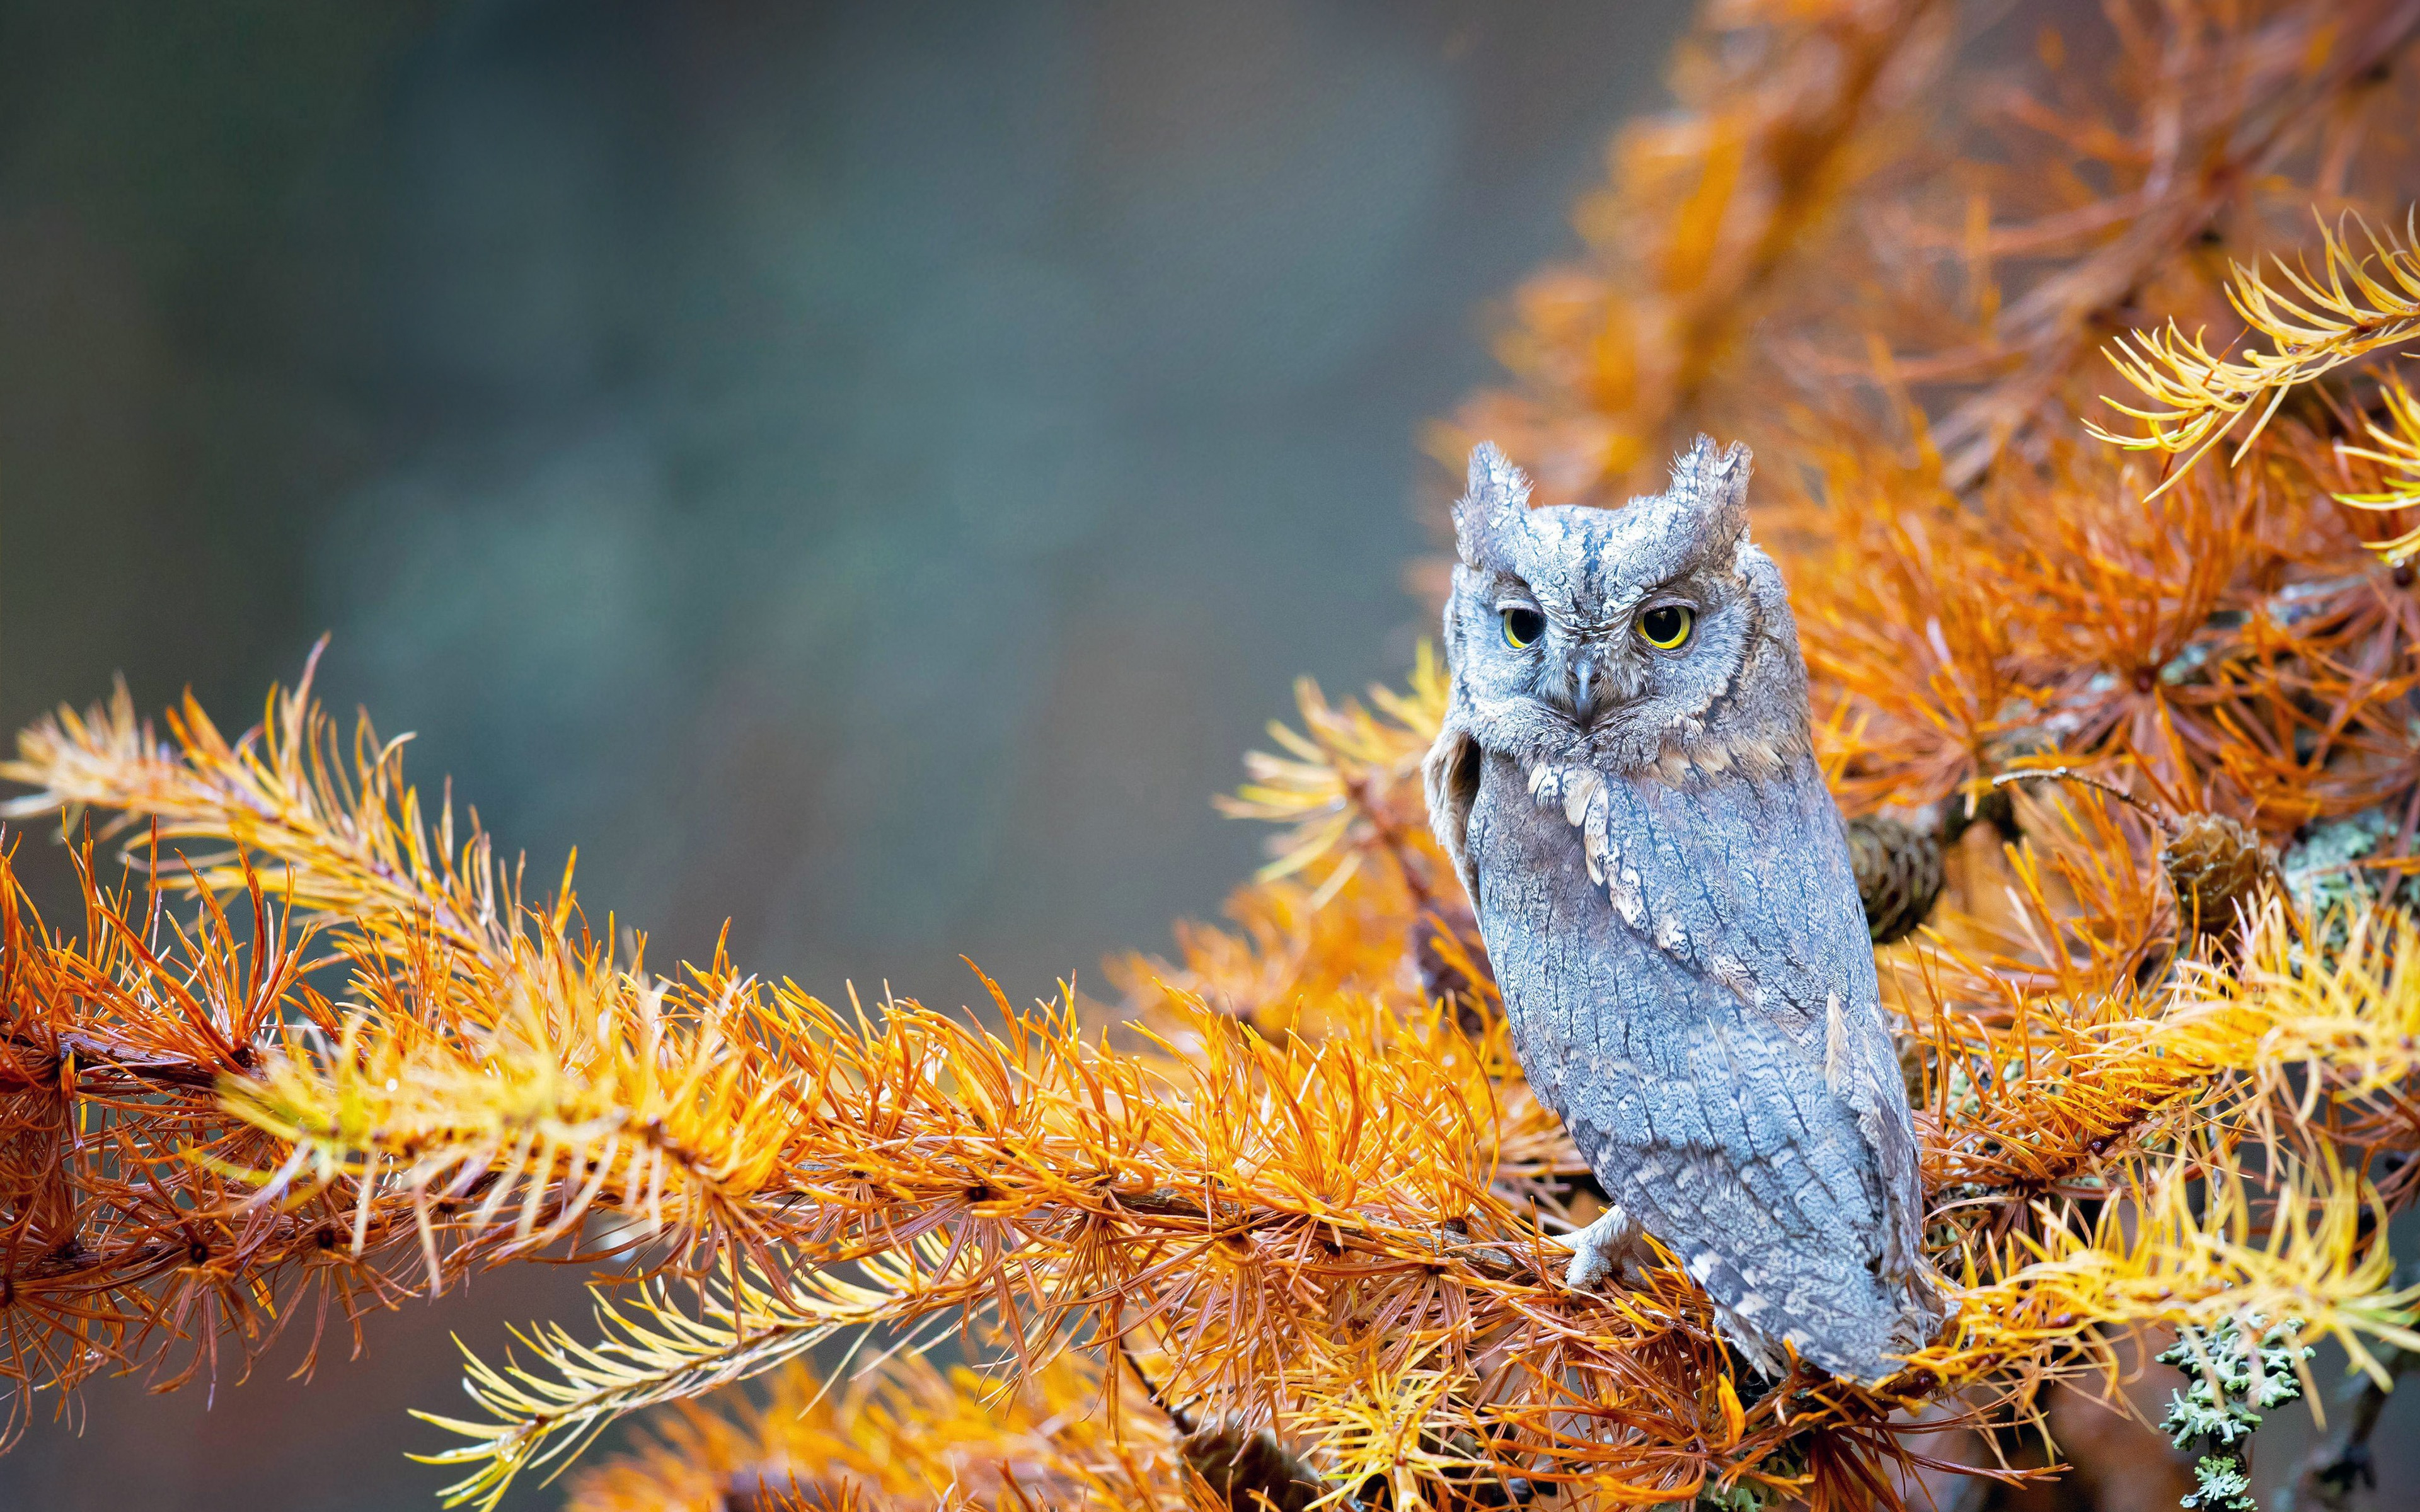 An owl sits on a branch with yellow needles.